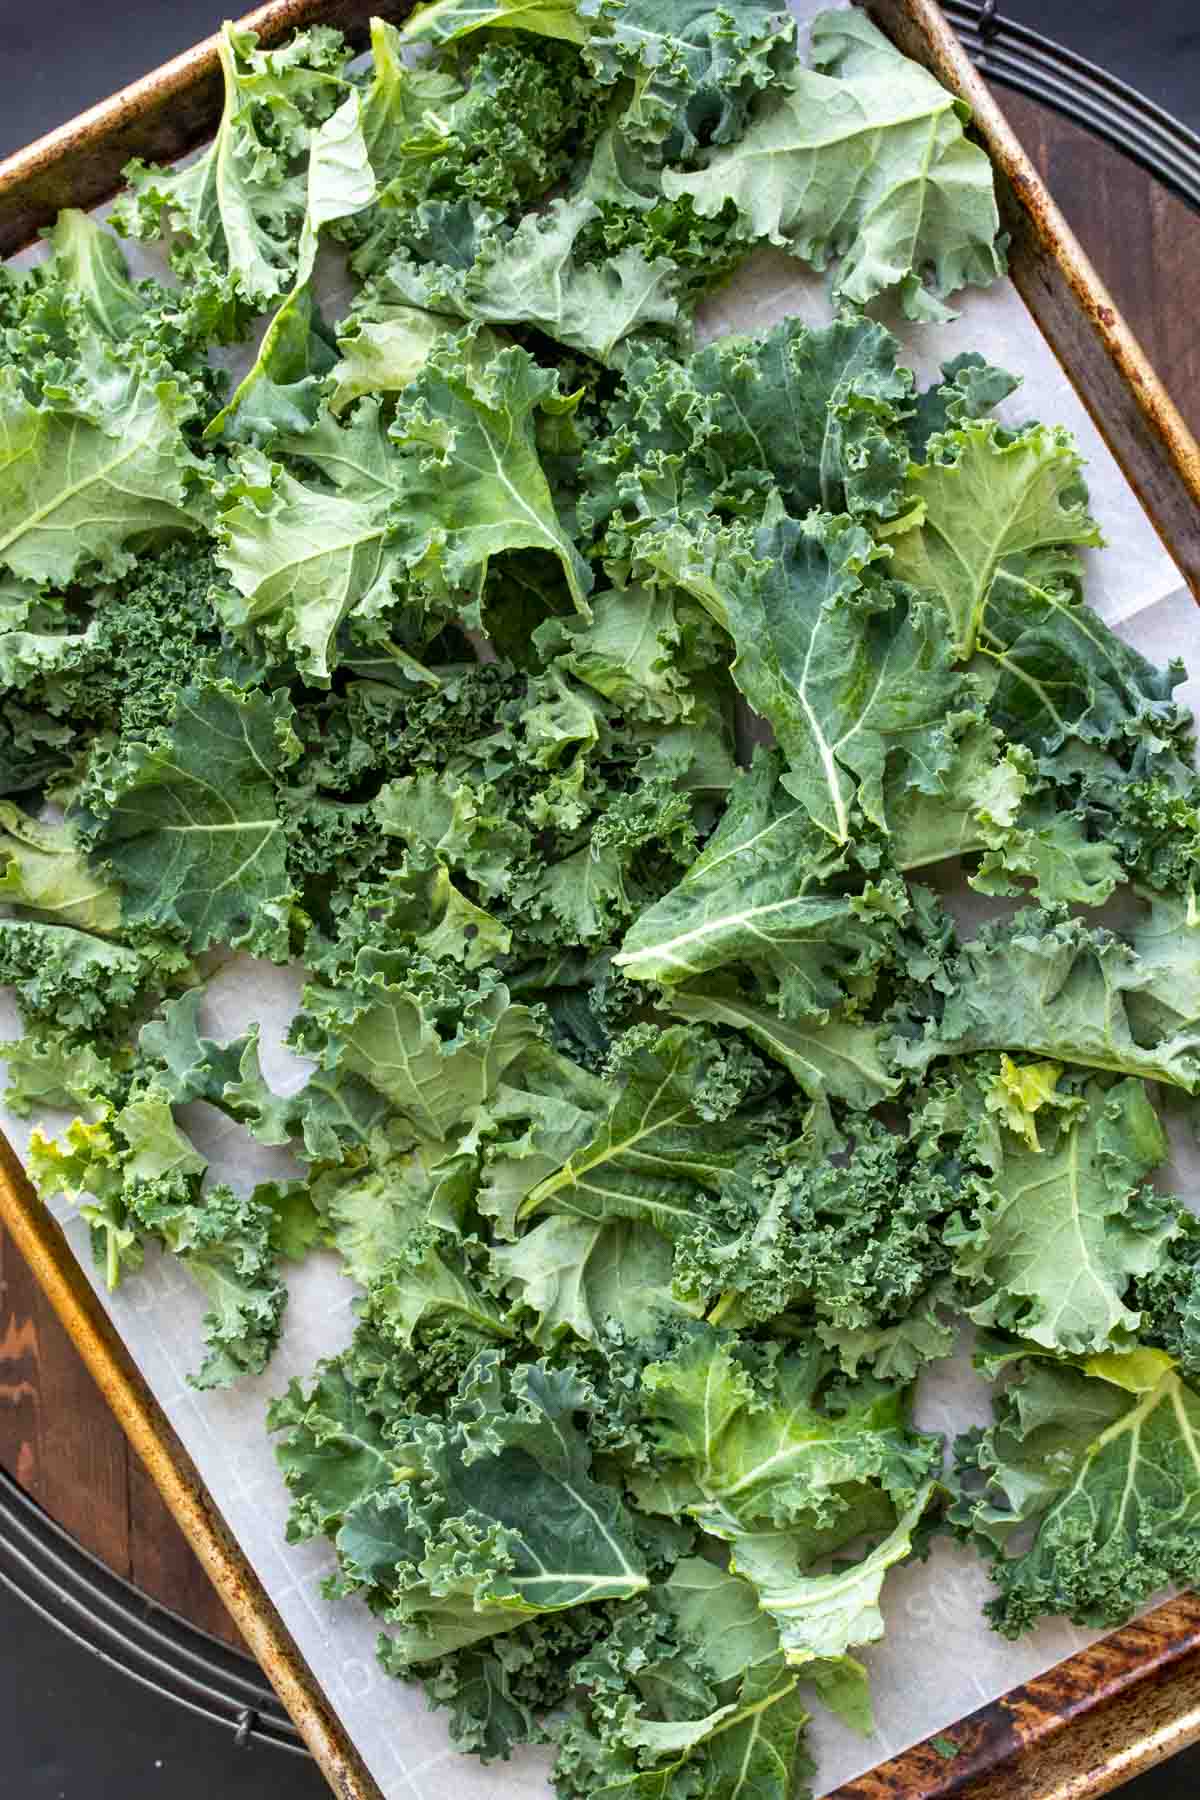 Cookie sheet with parchment and pile of kale pieces on top